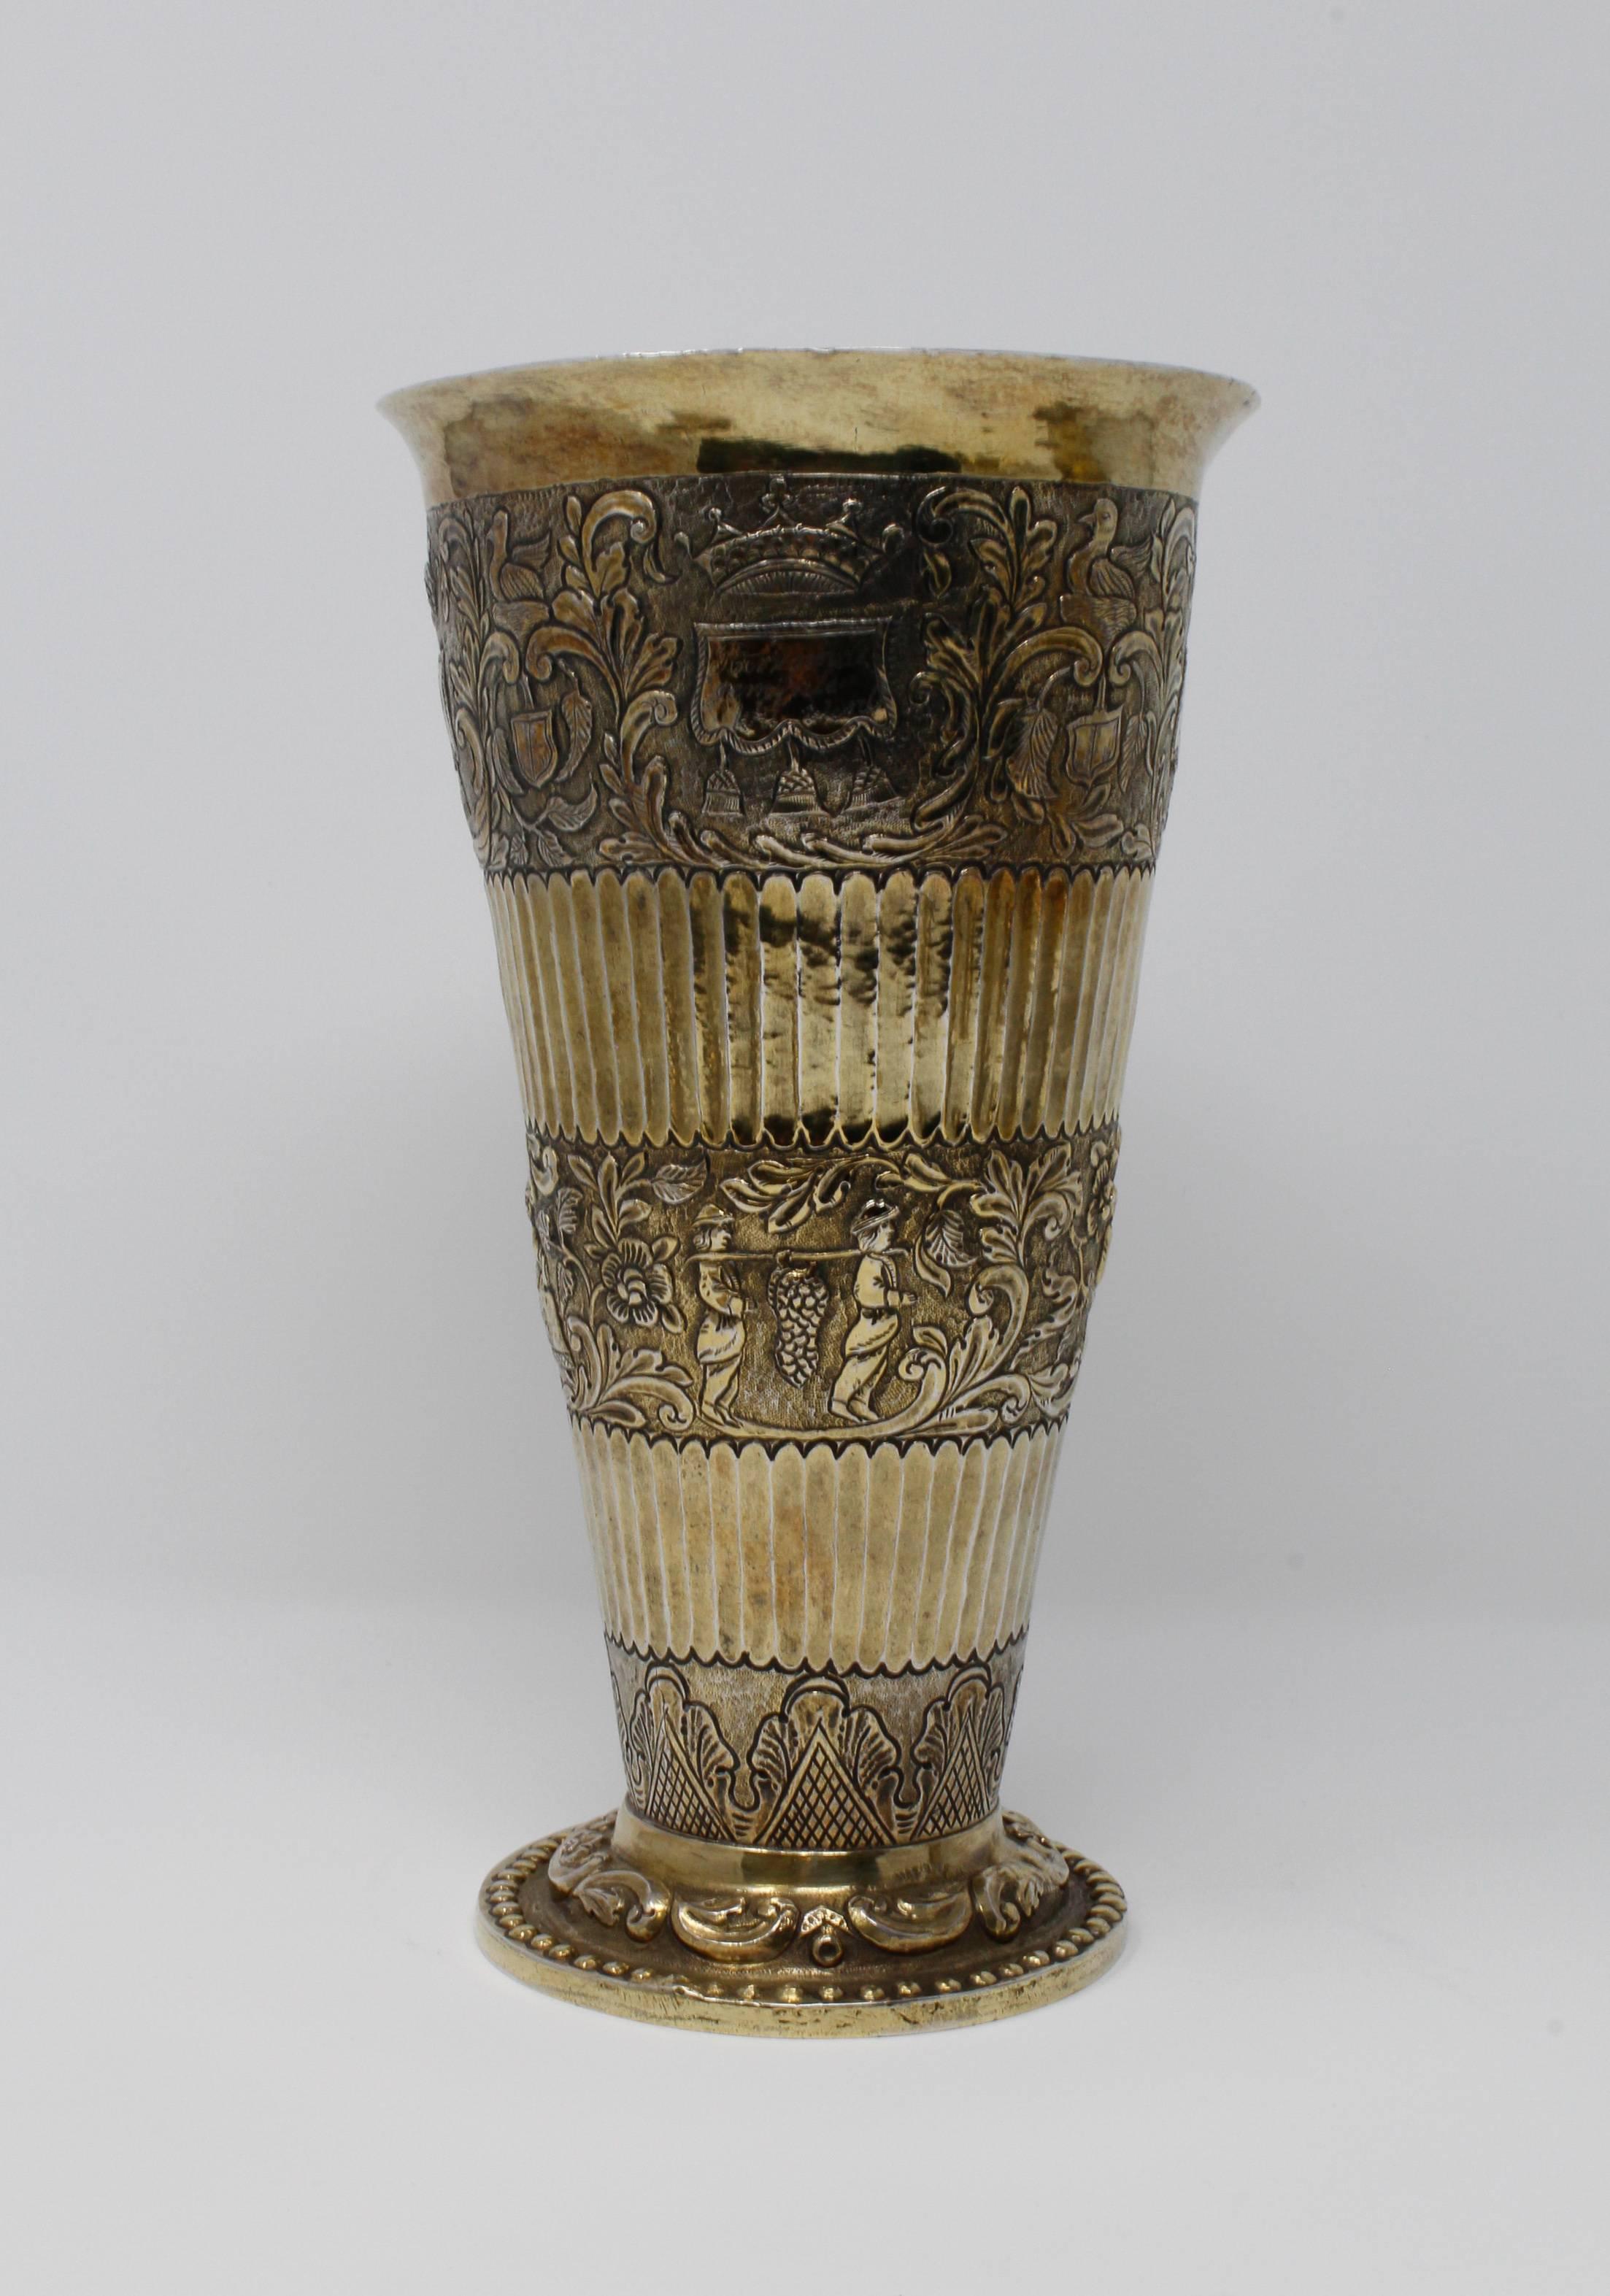 Covered Vases with Removable Lids, Gilt Silver, German in 17th Century Style In Excellent Condition For Sale In Santa Fe, NM